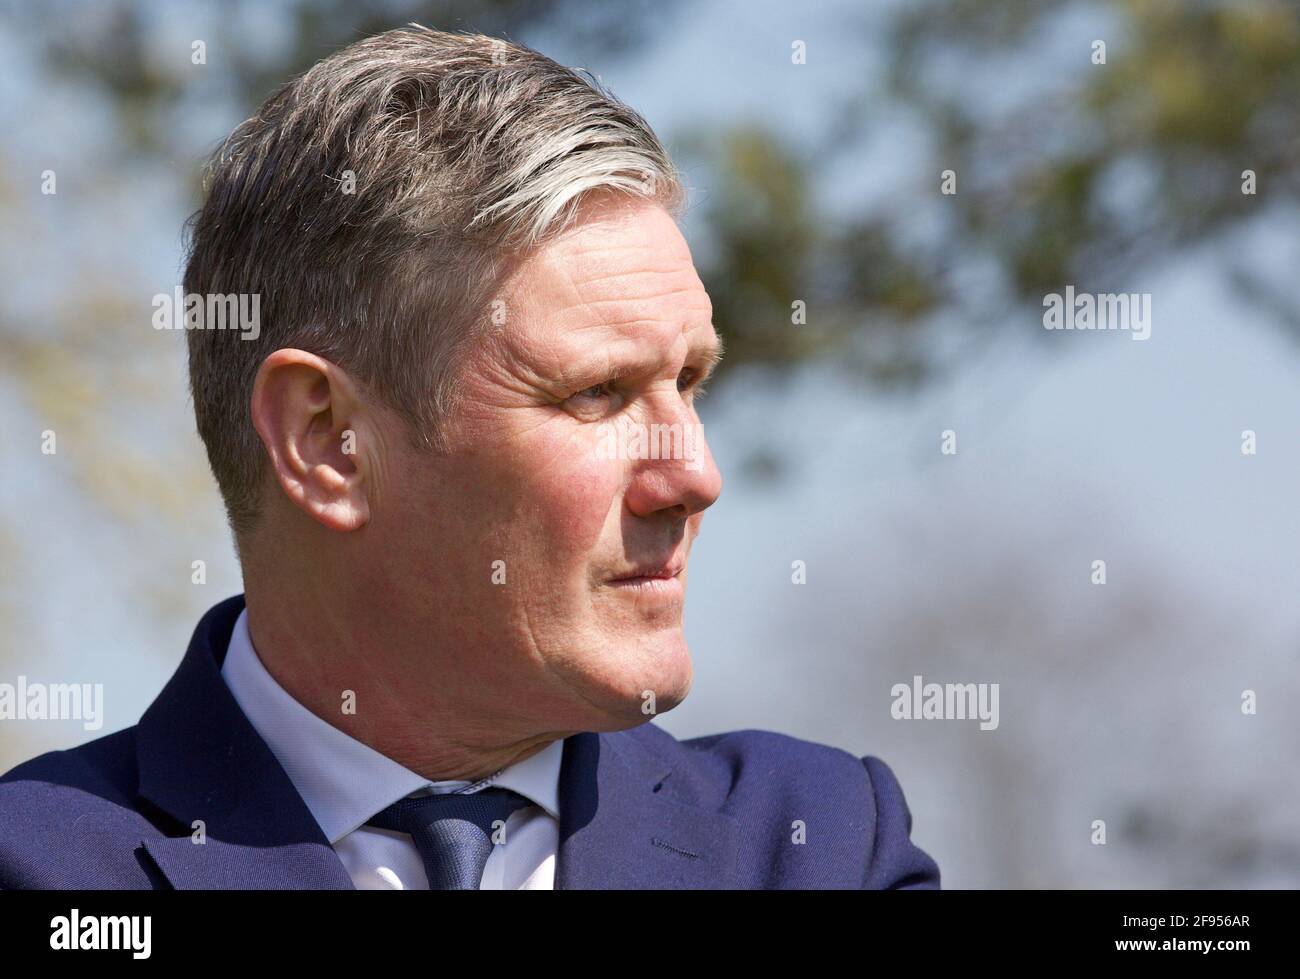 Edinburgh, UK, 16th April 2021L: Sir Keir Starmer supporting Scottish Labour in Scottish elections. PiC Credit: Terry Murden/Alamy Live News Stock Photo